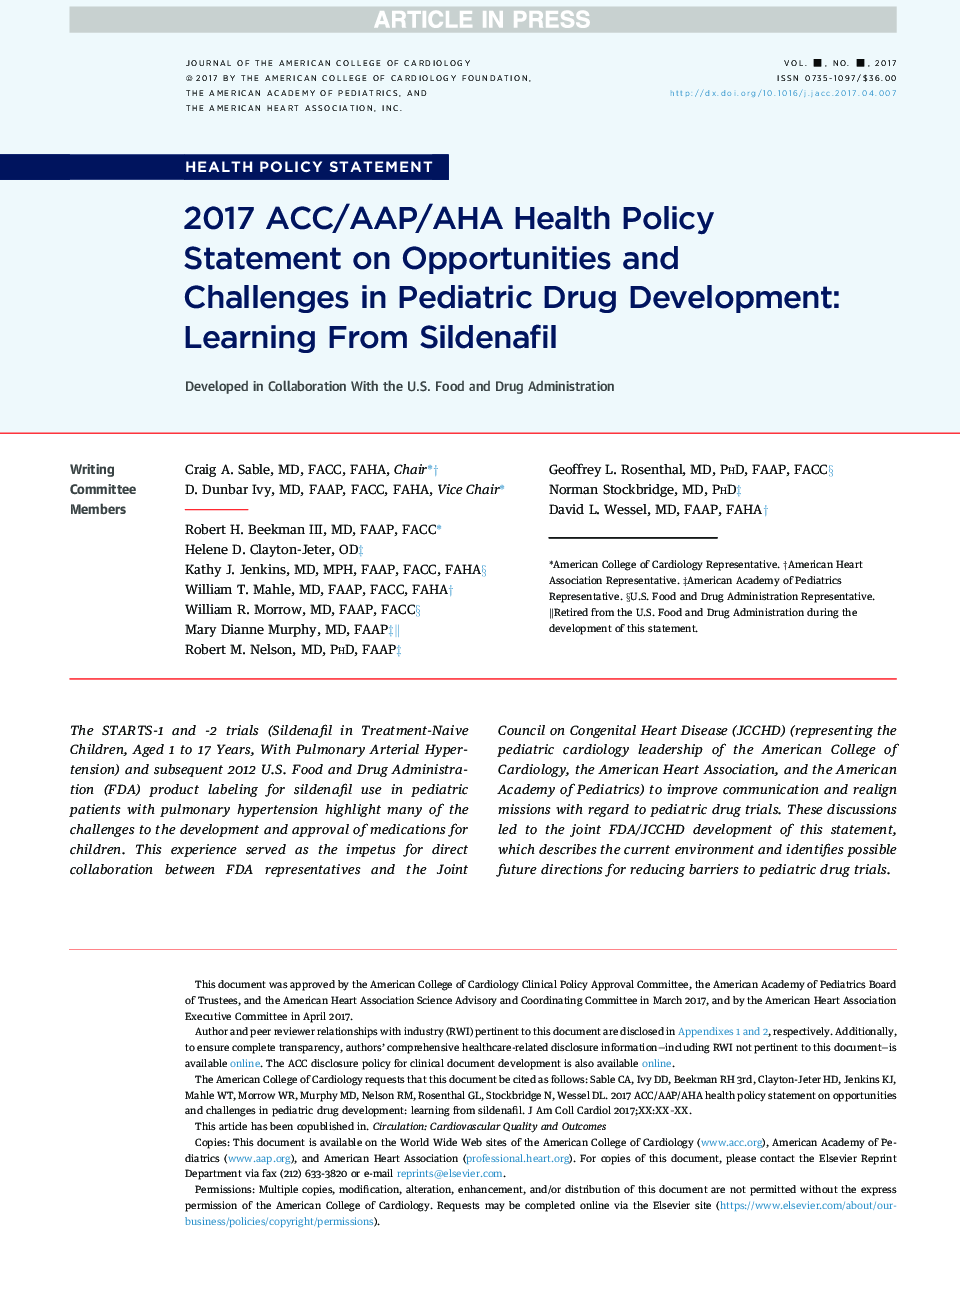 2017 ACC/AAP/AHA Health Policy Statement on Opportunities and Challenges in Pediatric Drug Development: Learning From Sildenafil